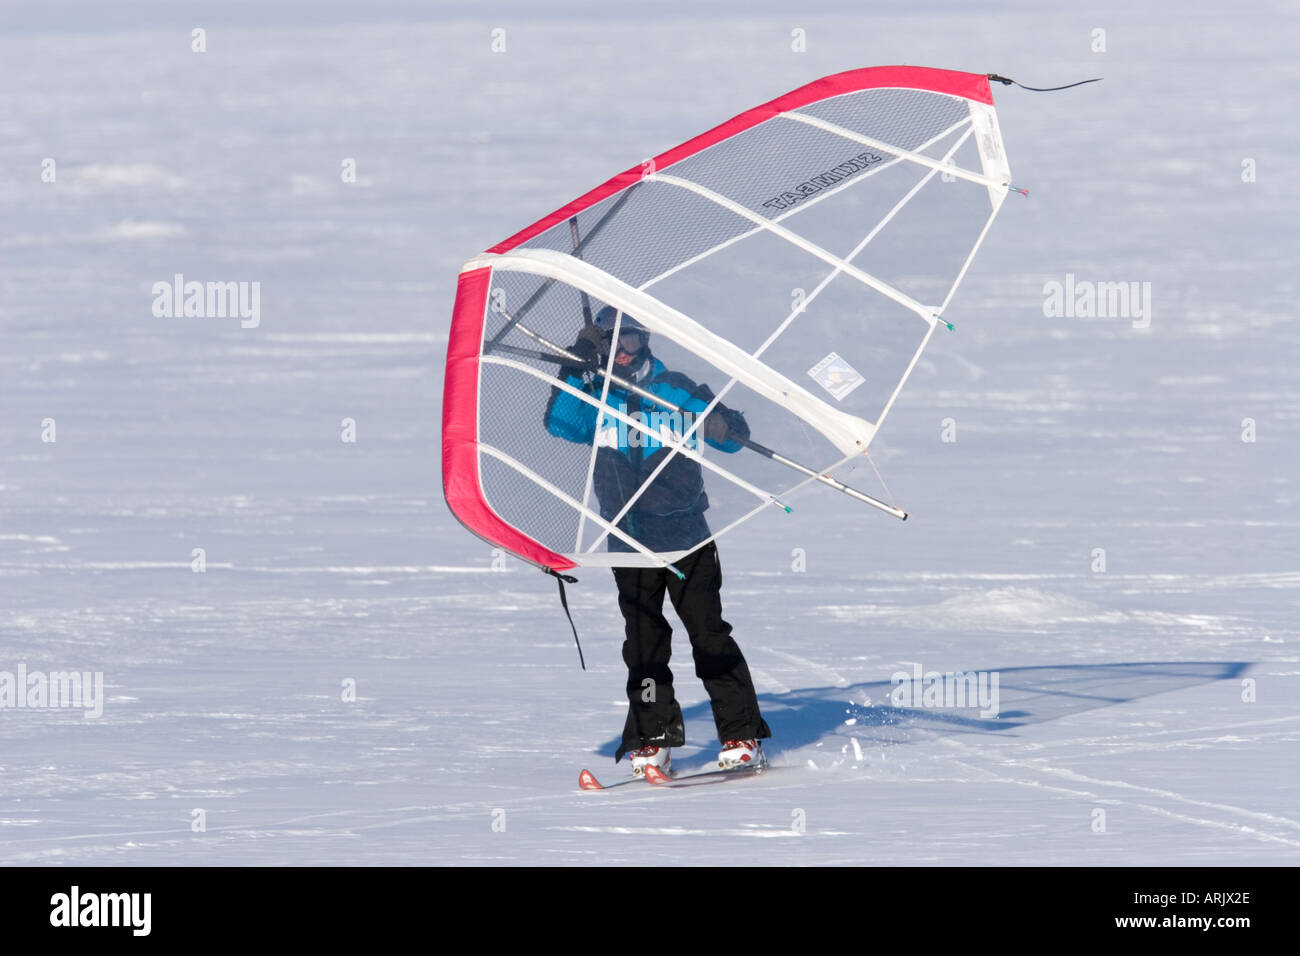 Man skiing on frozen sea ice at Wintertime using a kitewing , Finland Stock Photo